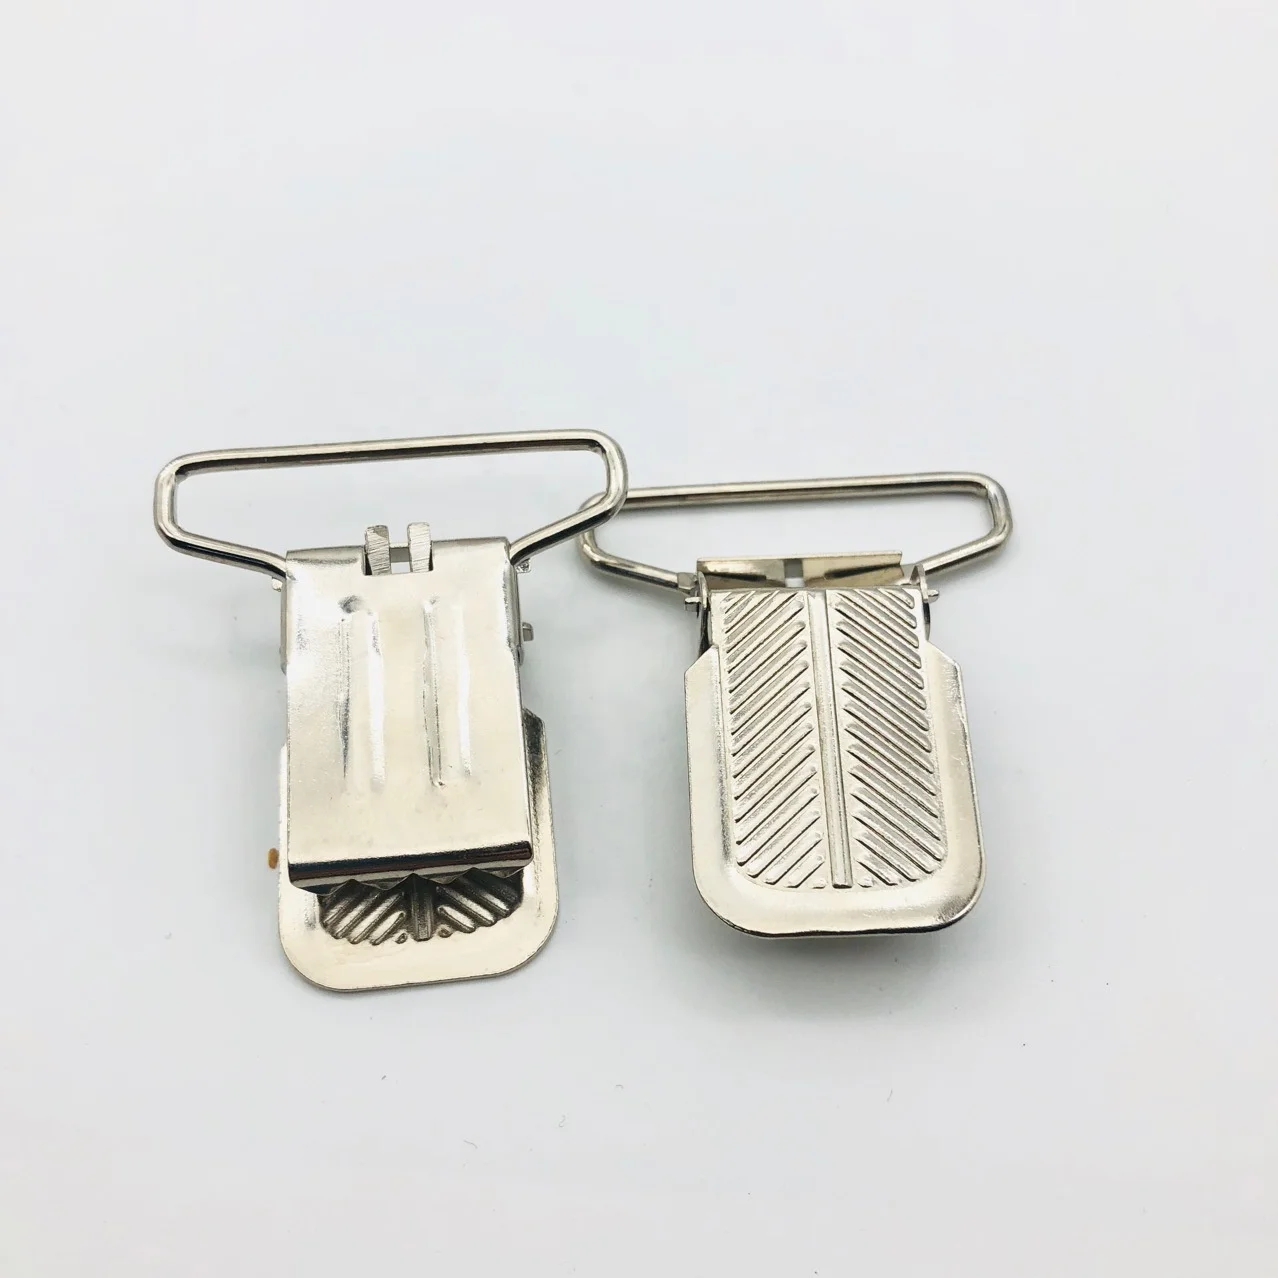 suspender clips for baby clothes trousers